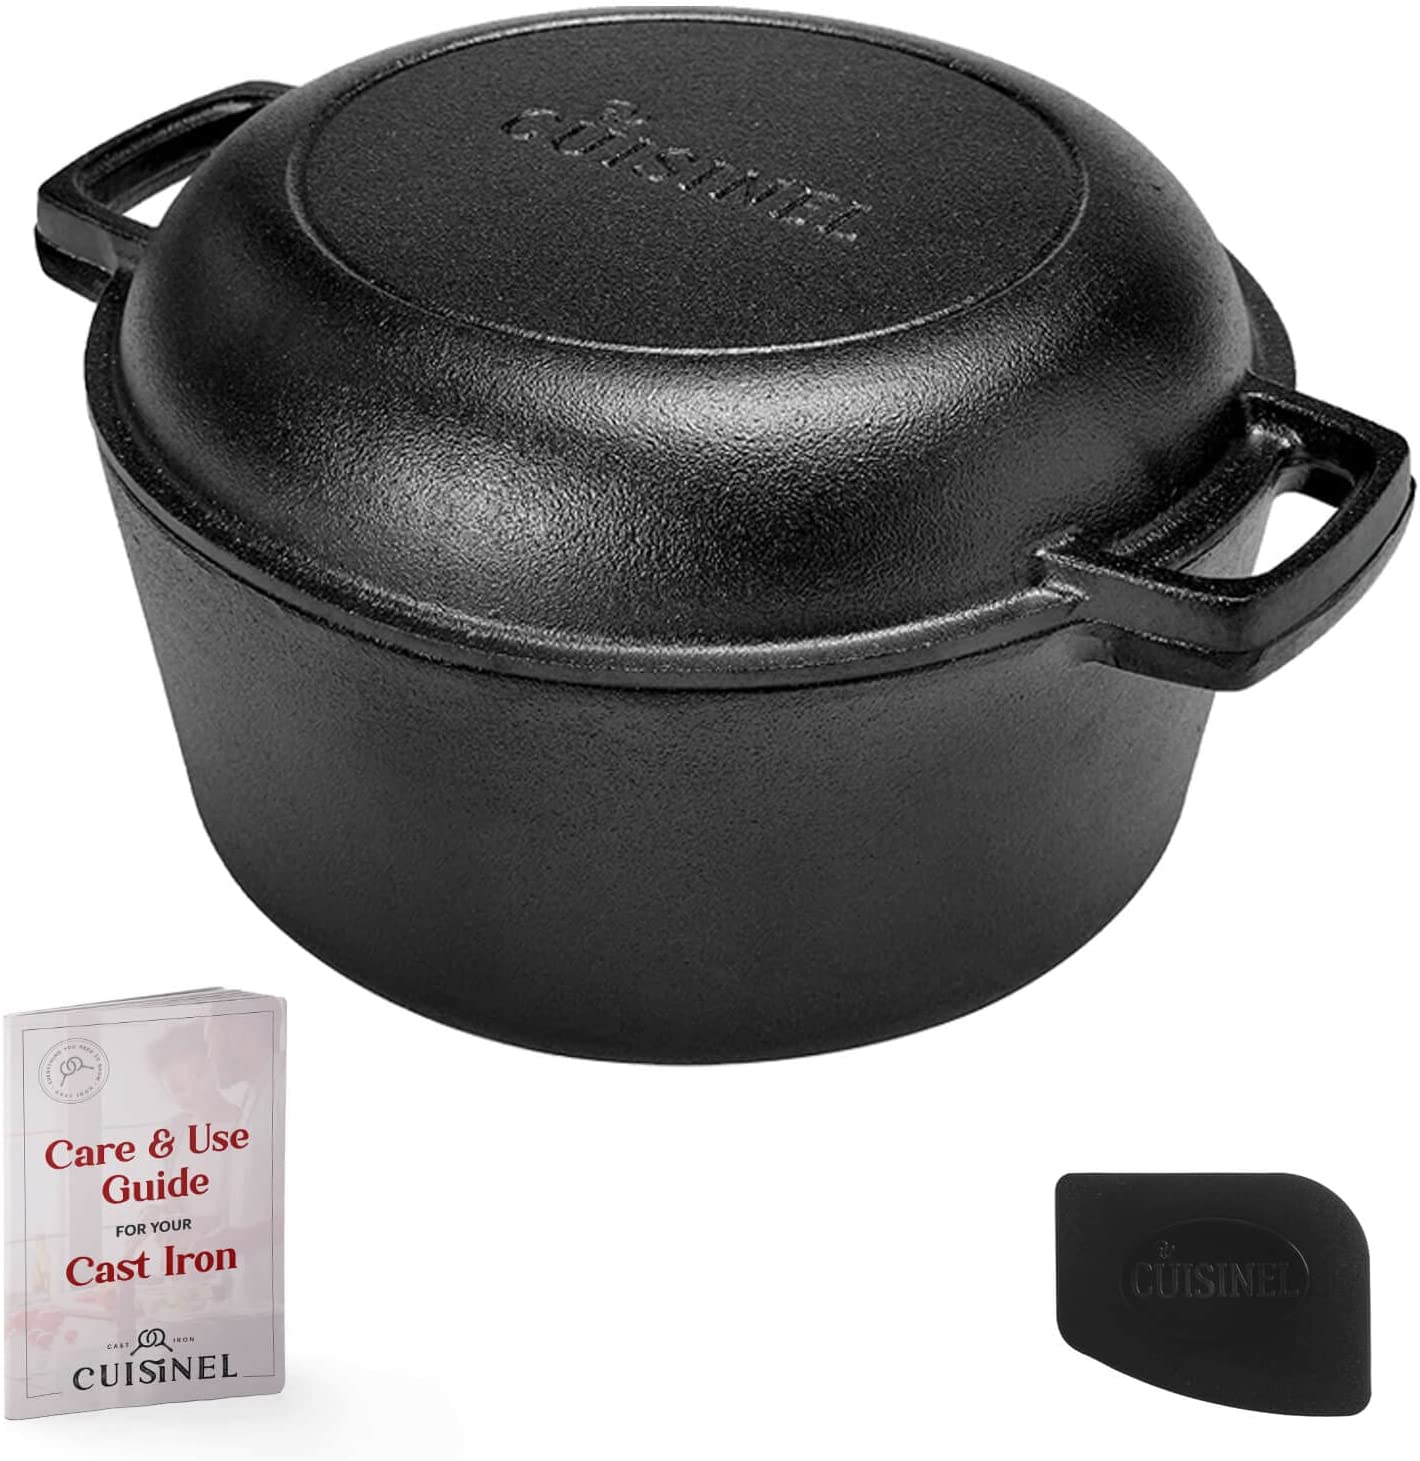 Overmont 2-in-1 Cast Iron Dutch Oven Review: Expert Opinion